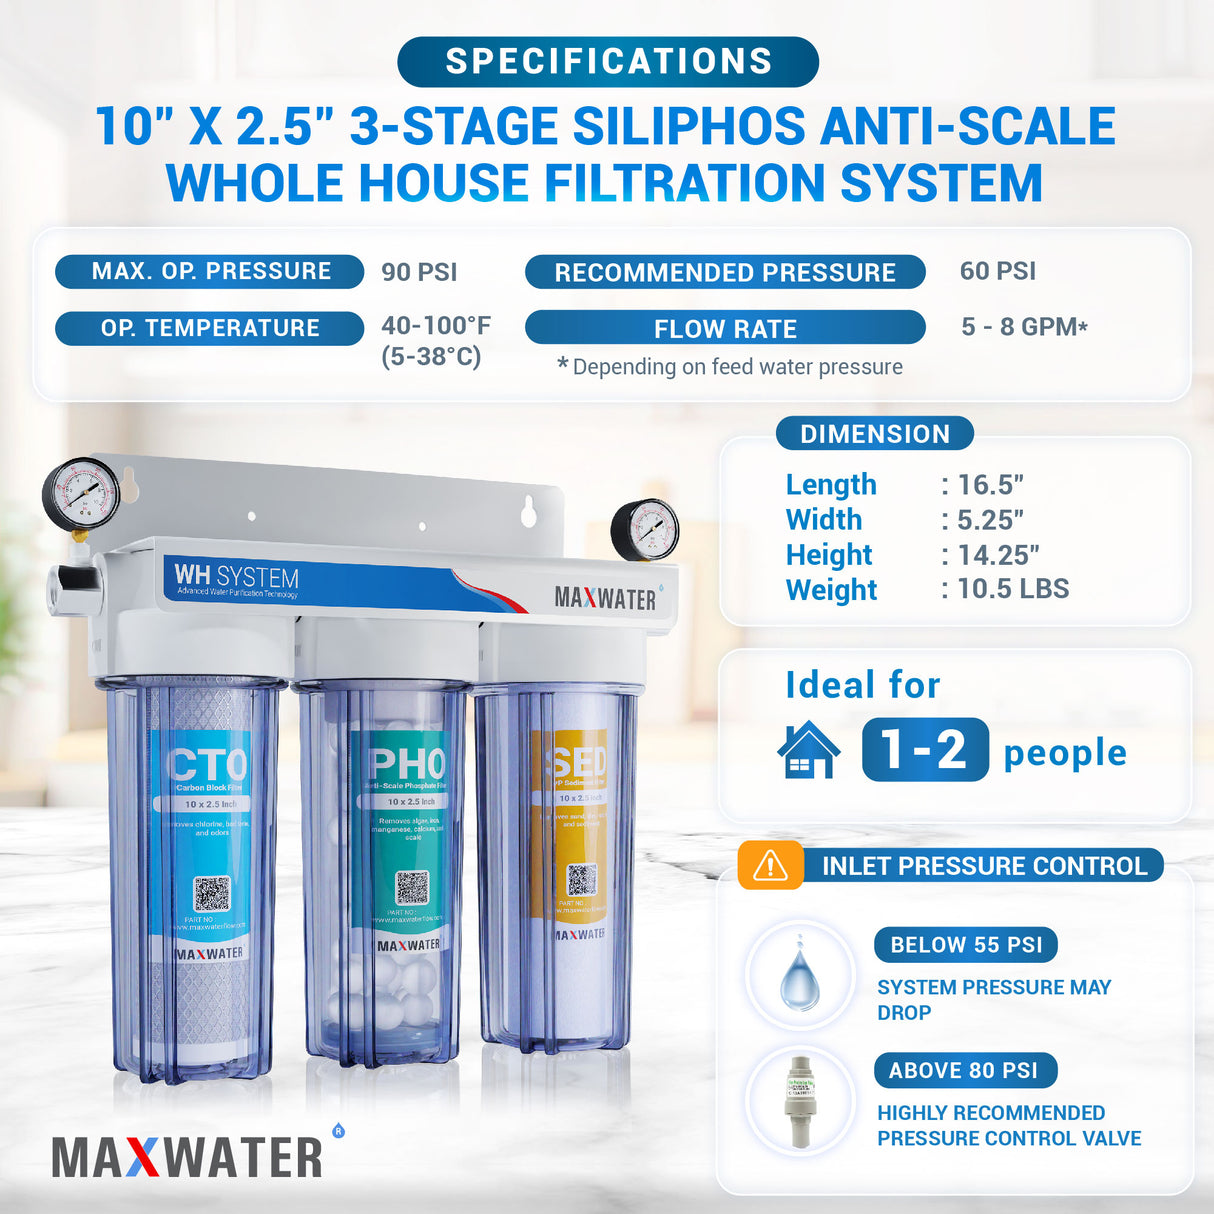 Anti-scale 3-Stage Water Filtration System, 10” x 2.5" size